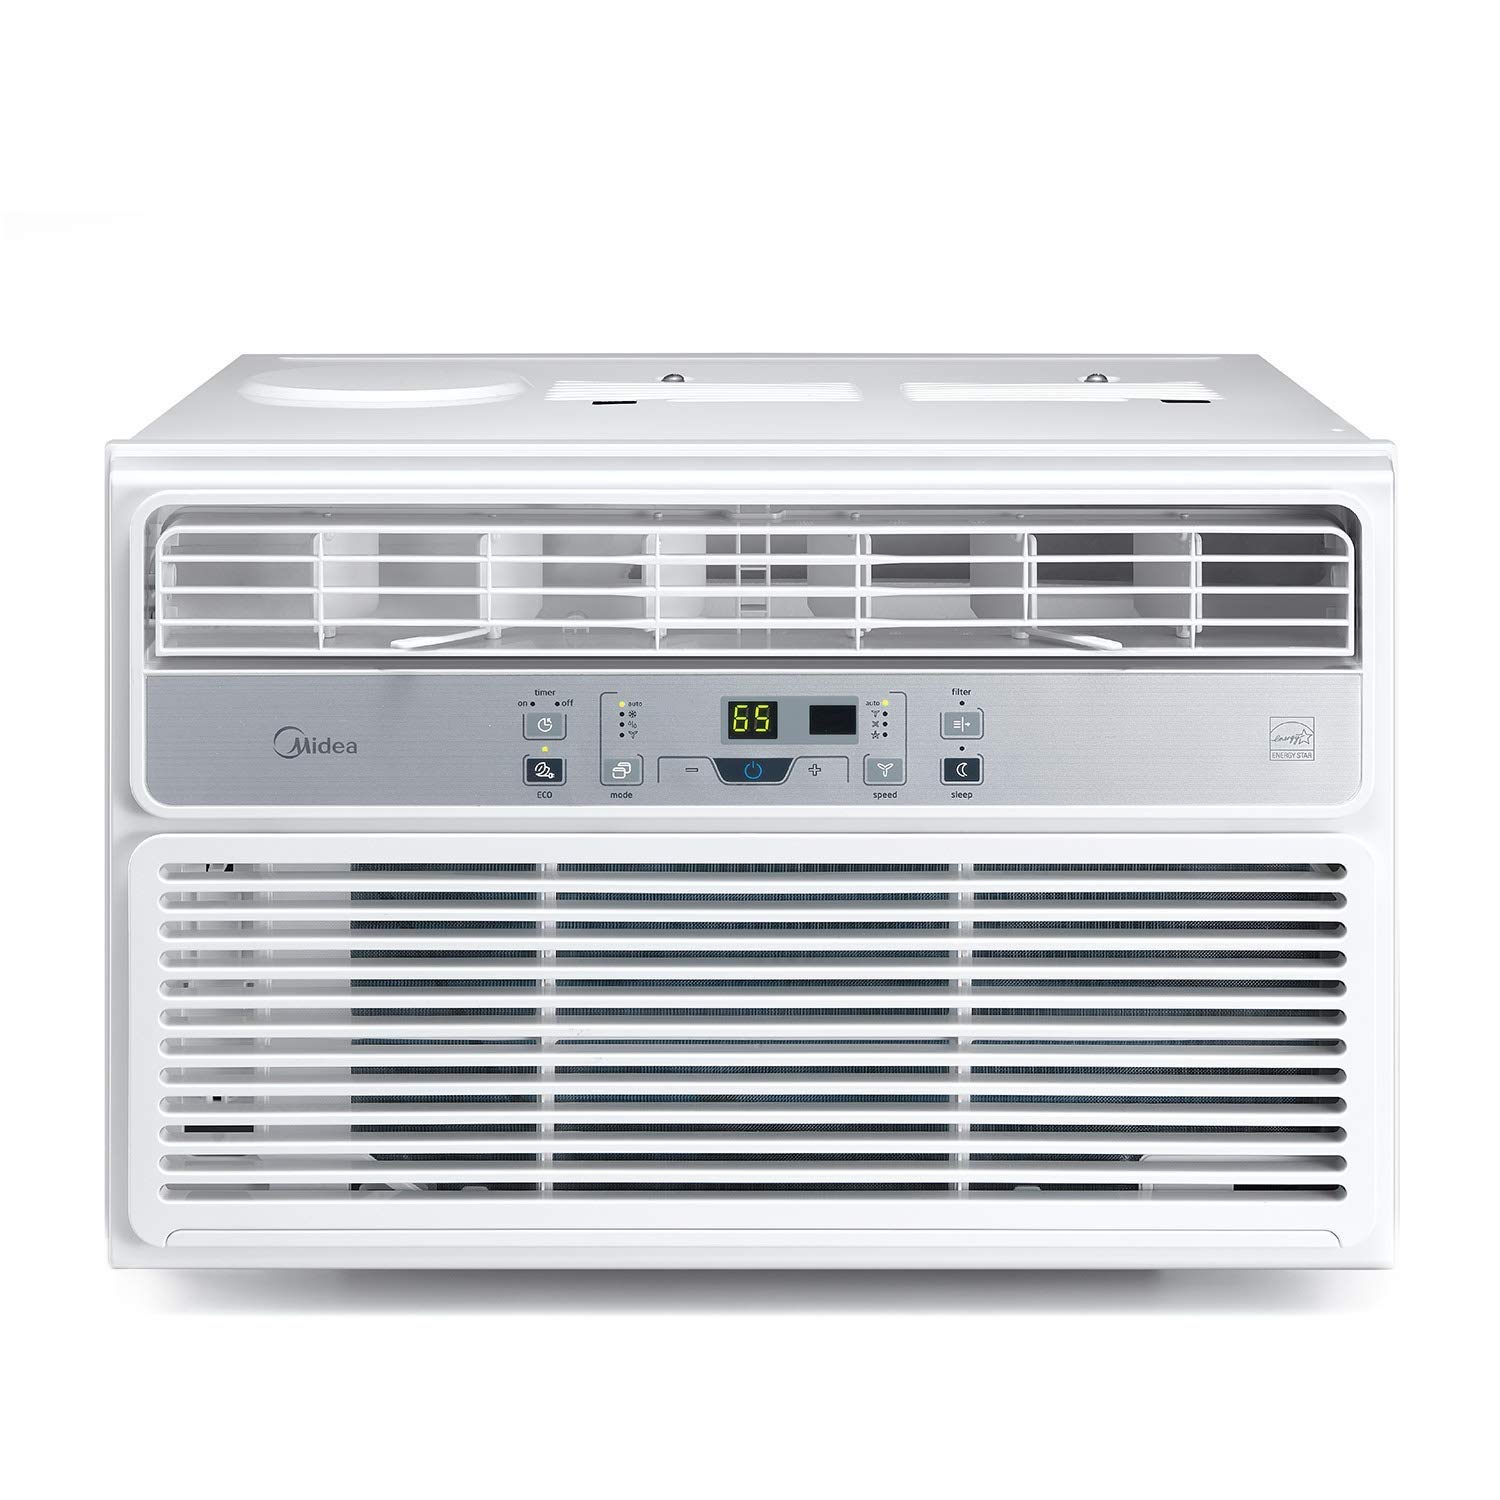 Midea 8,000 BTU EasyCool Window Air Conditioner, Dehumidifier and Fan - Cool, Circulate and Dehumidify up to 350 Sq. Ft., Reusable Filter, Remote Control